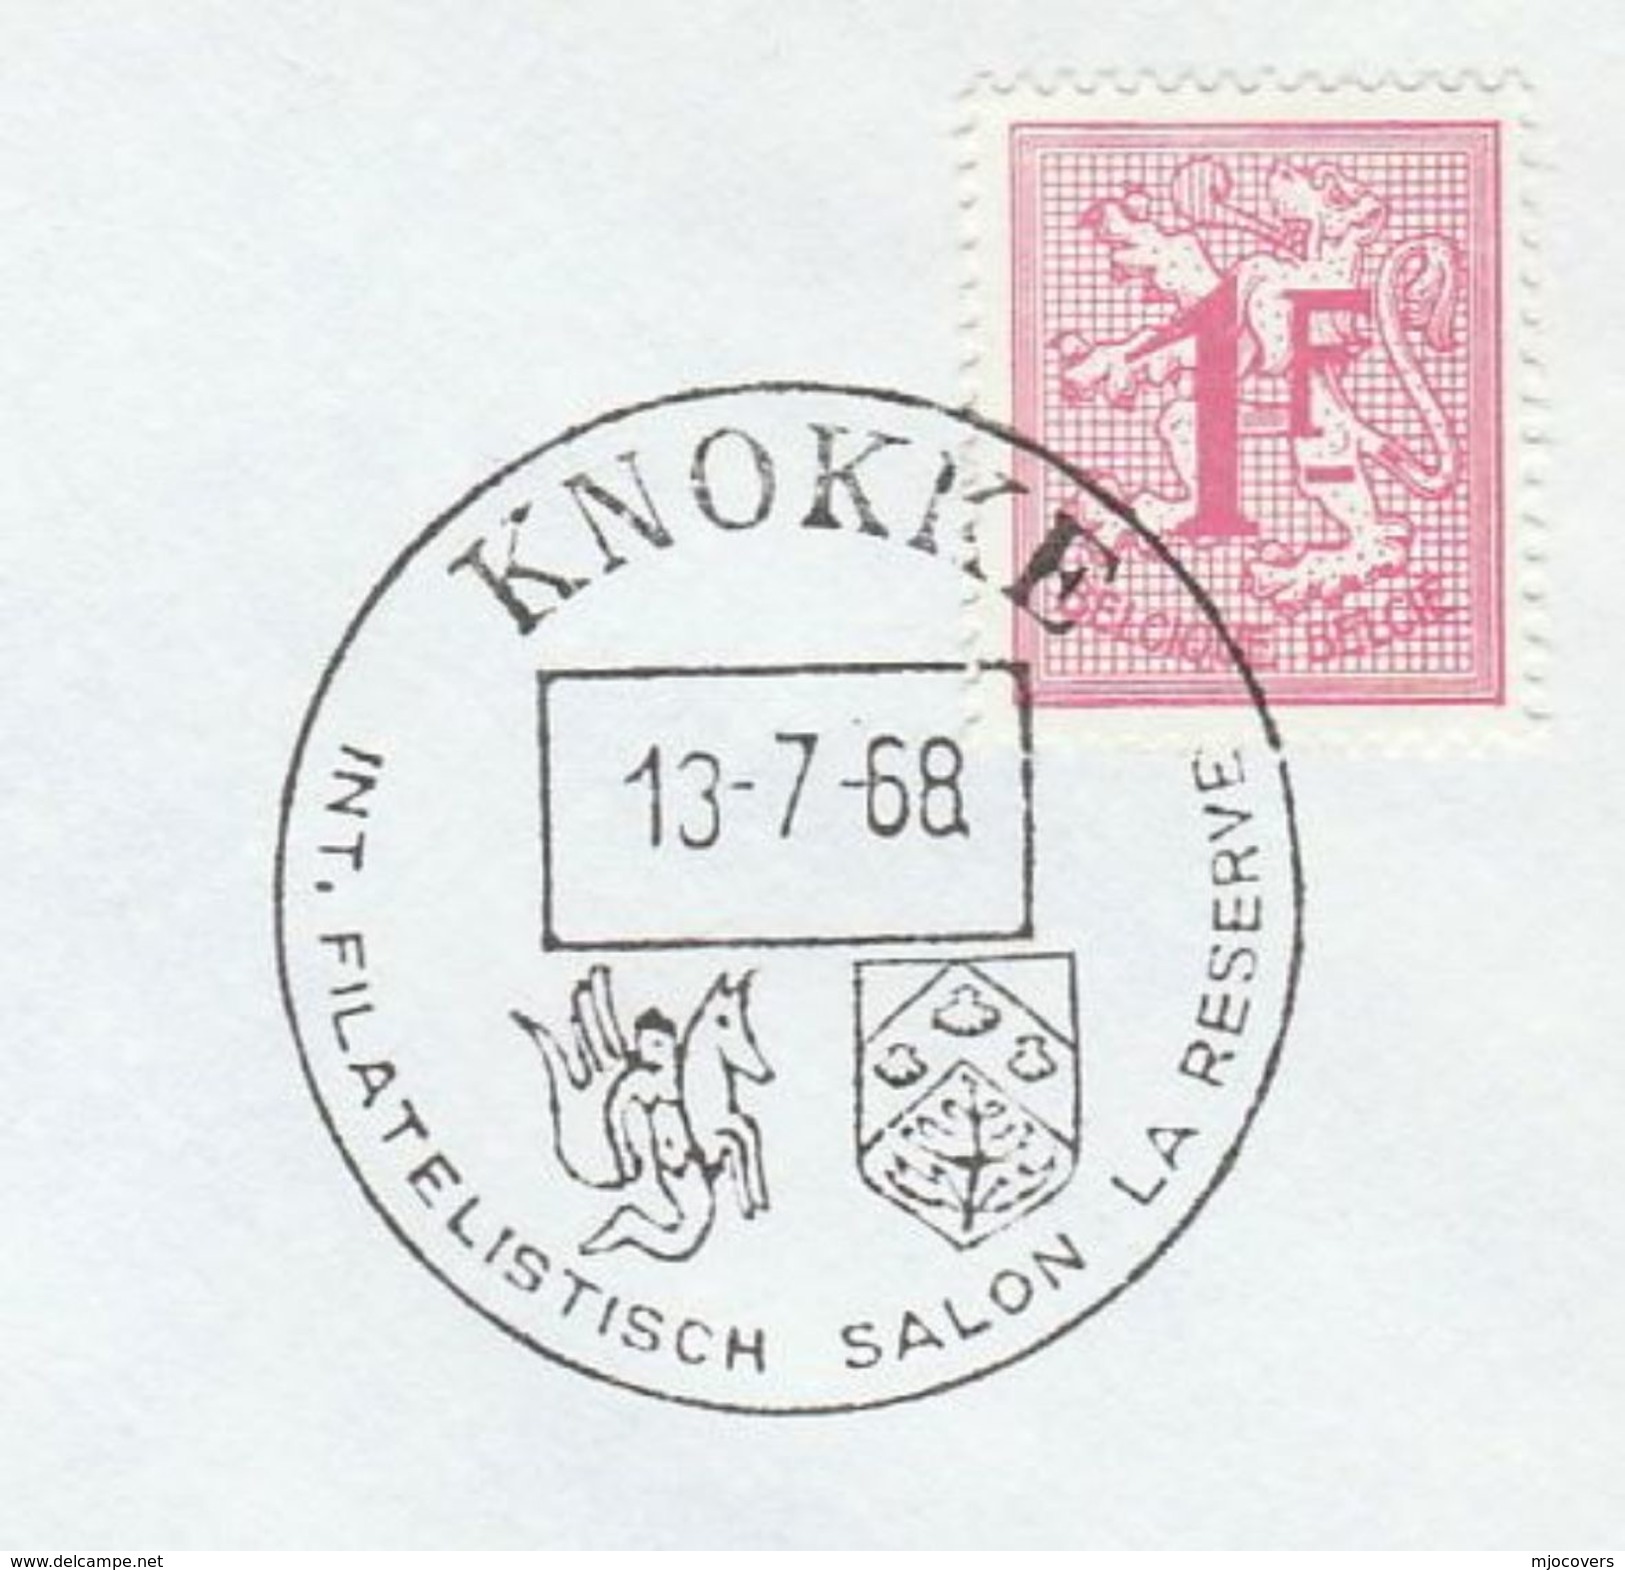 1968 Knokke MERMAID ?  EVENT COVER Coat Of Arms Philatelic Exhibition, Stamps - Mythology